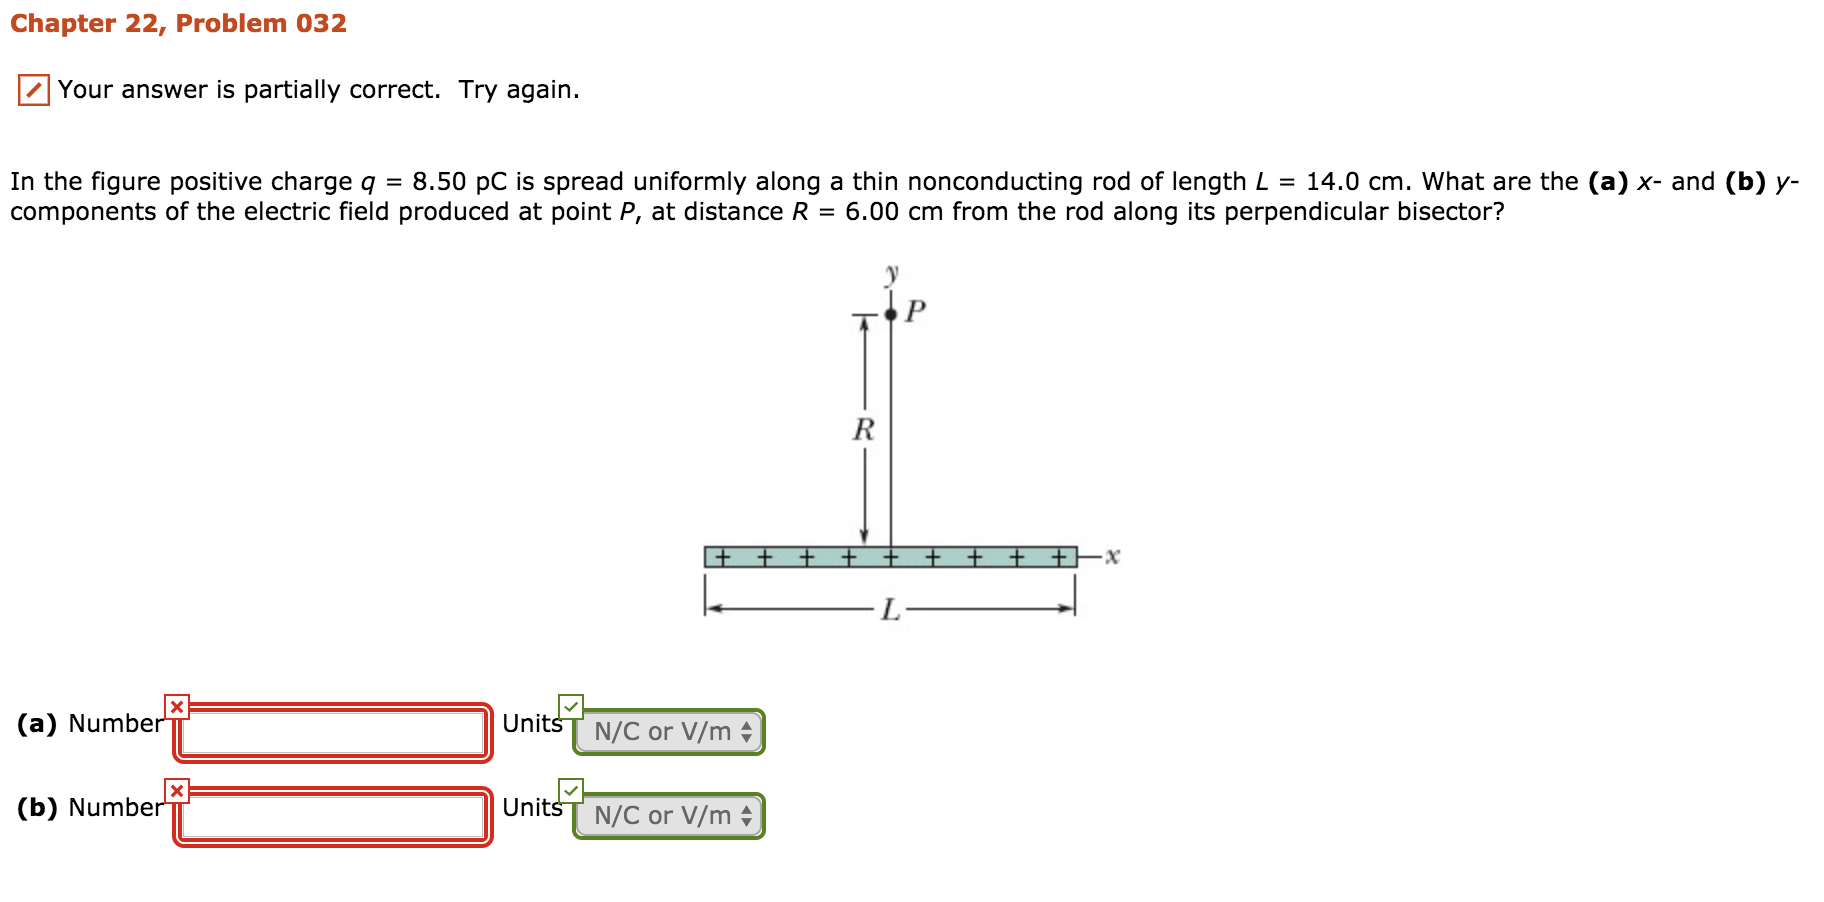 Chapter 22, Problem 032
Your answer is partially correct. Try again.
In the figure positive charge q = 8.50 pC is spread uniformly along a thin nonconducting rod of length L 14.0 cm, what are the (a) x-and (b) y-
components of the electric field produced at point P, at distance R = 6.00 cm from the rod along its perpendicular bisector?
Units
(a) Number
N/C or V/m
UnitsT N/C or V/m
